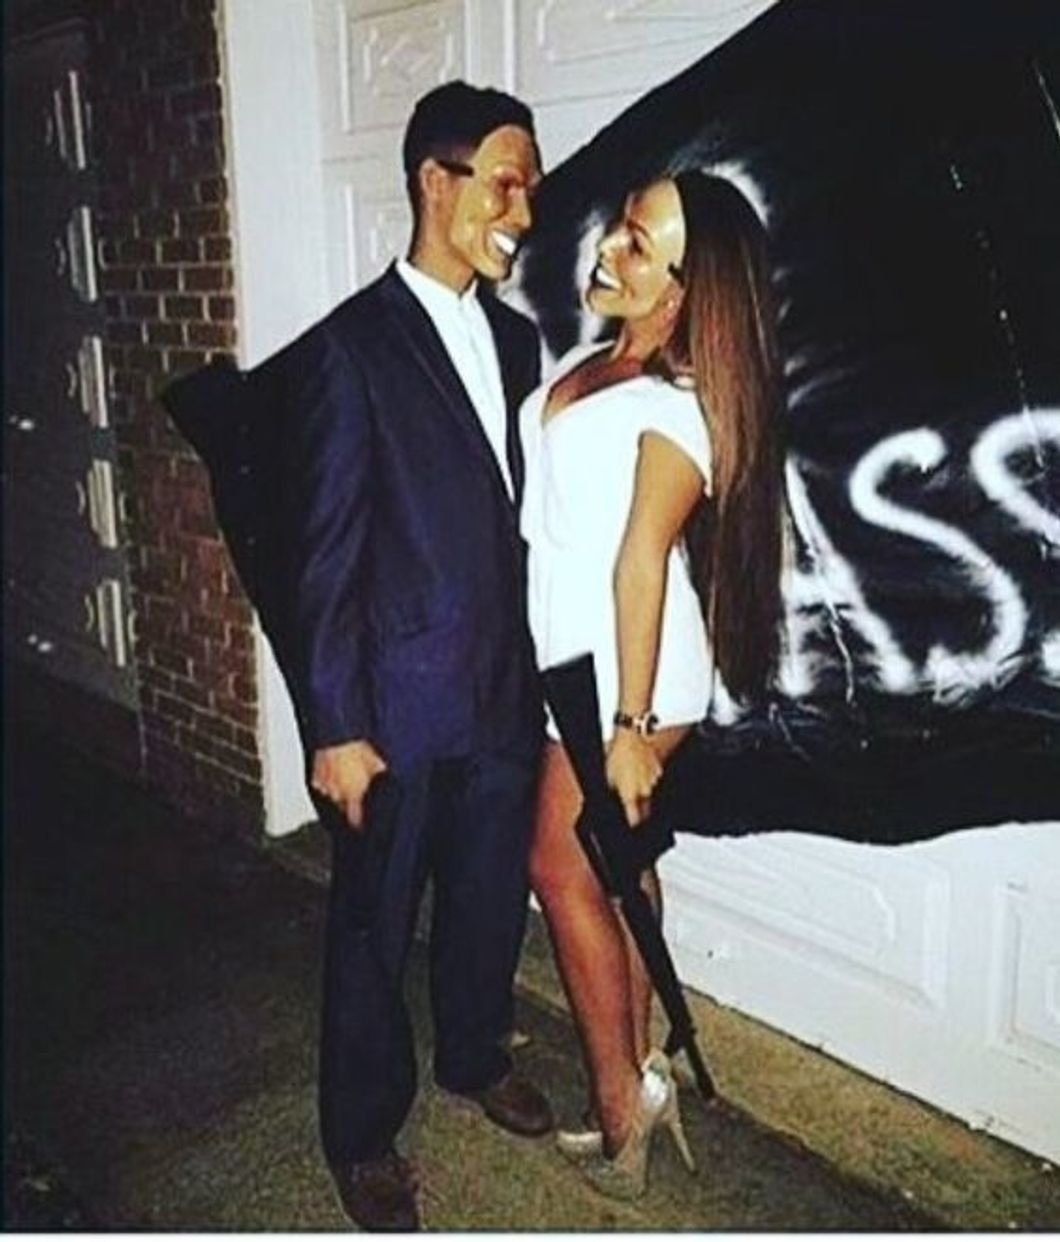 17 Cute Halloween Couple Costumes You May Not Have Thought Of